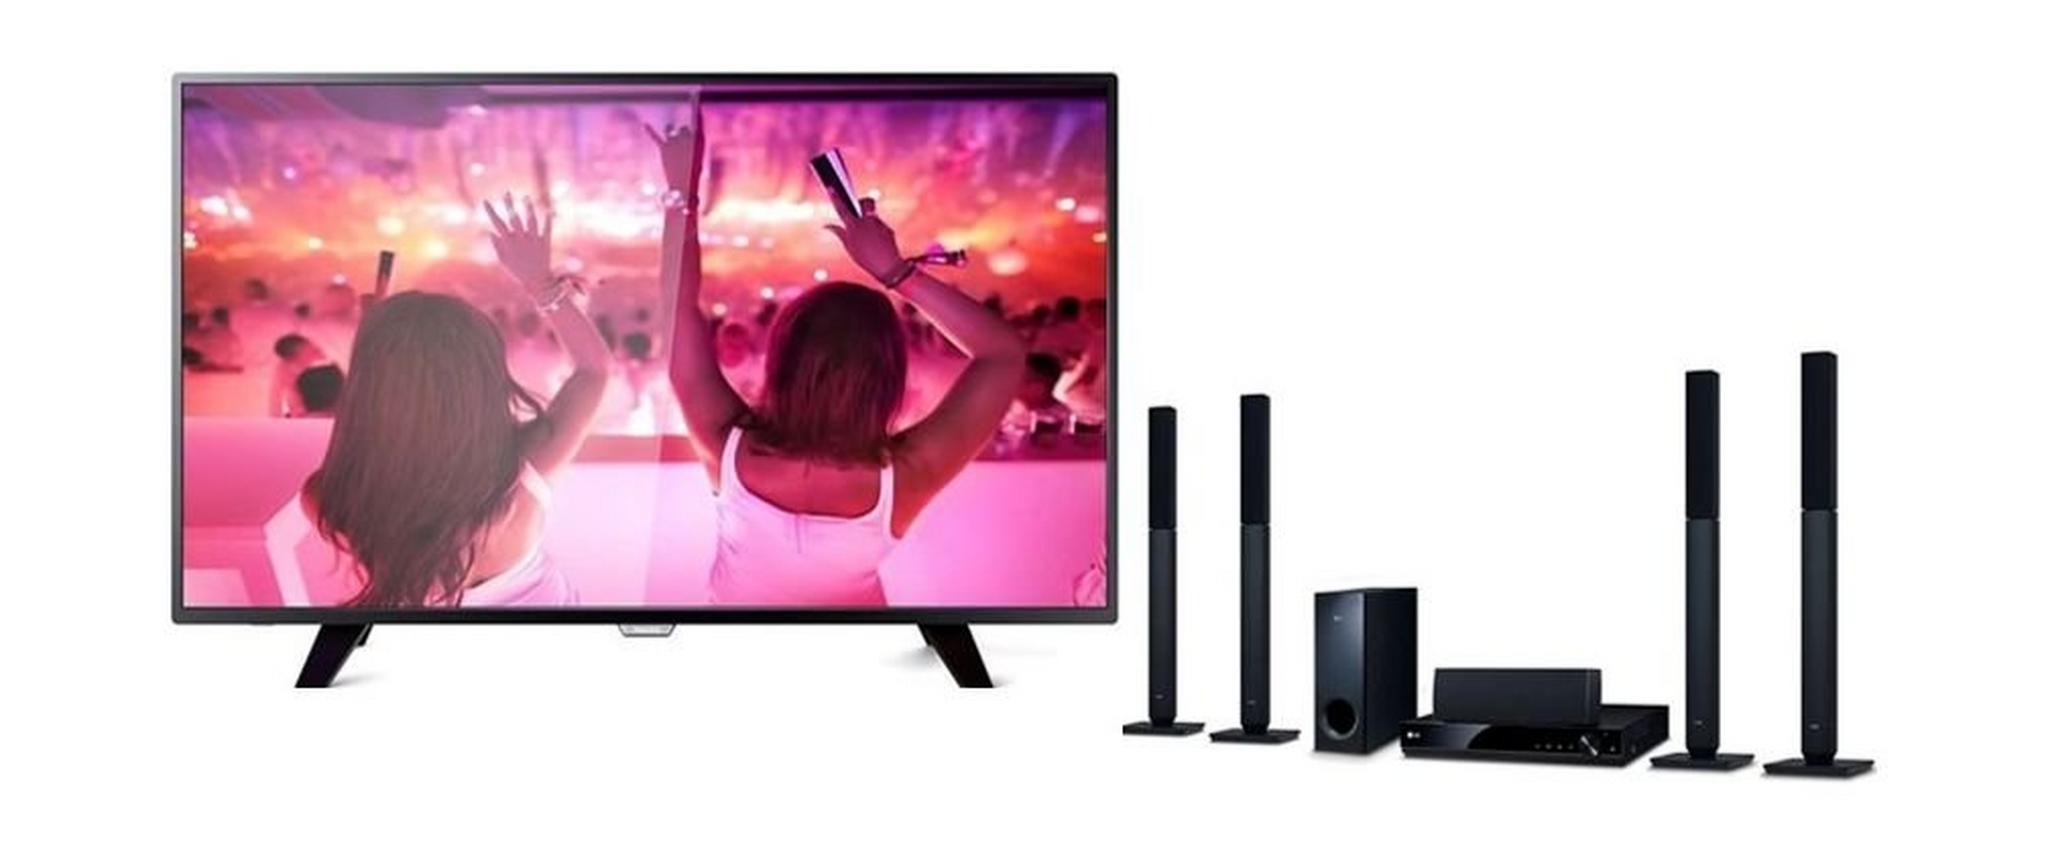 Philips 49-inch Ultra HD (2160p) Standard LED TV + LG 330W 5.1 Channel DVD Home Theater System